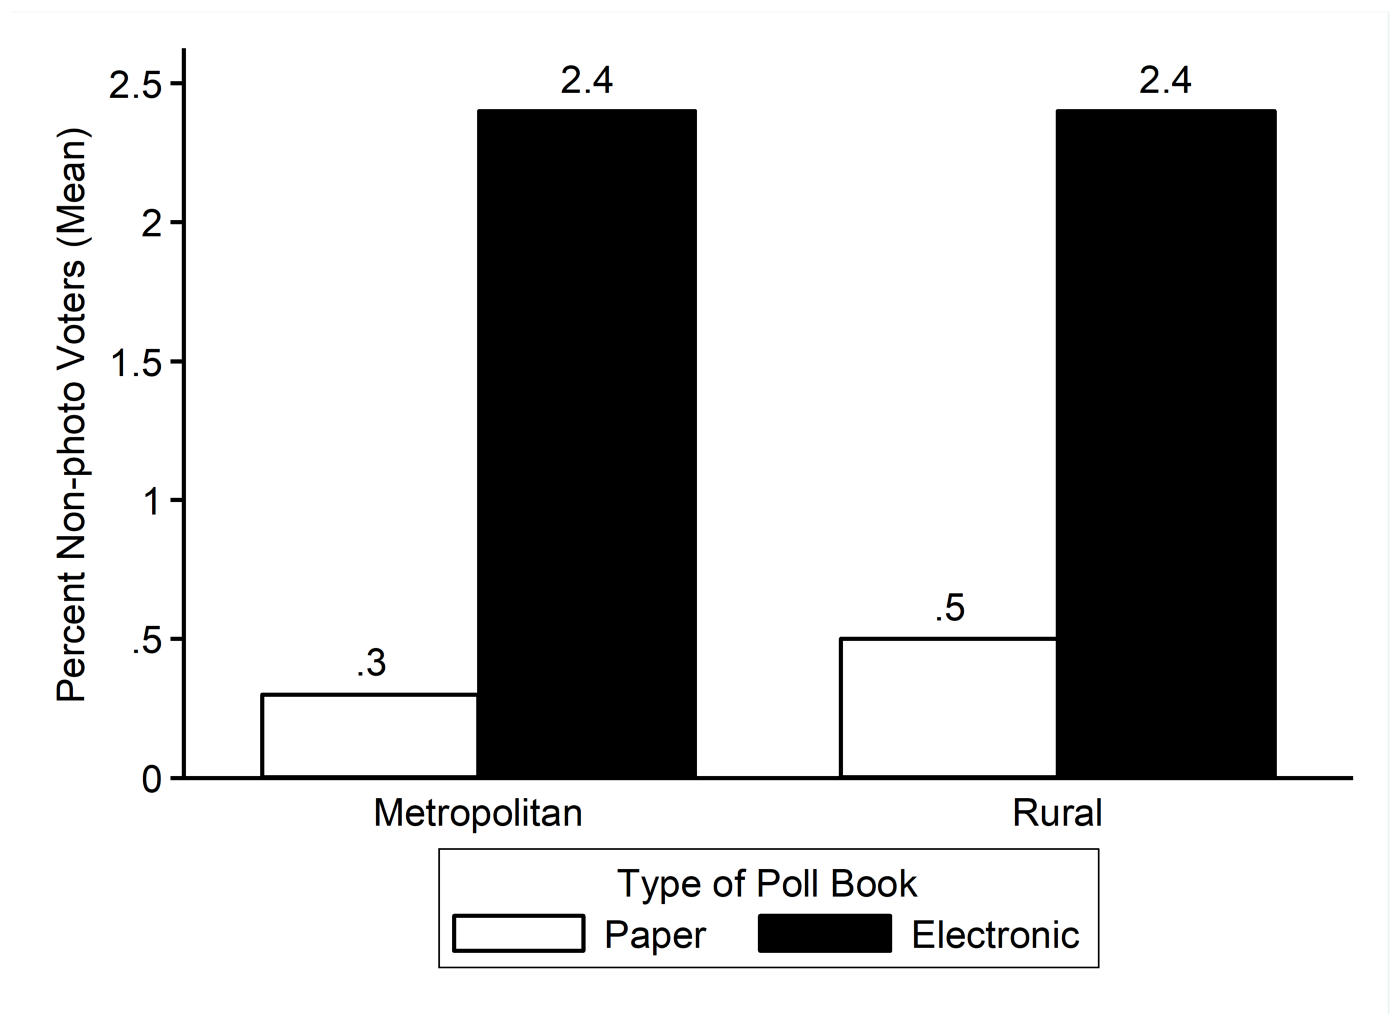 Bar chart showing average percent non-photo voters by region type (metropolitan vs rural). Displays that in both regions, percent of non-photo voters is much higher when electronic poll books are used (versus paper poll books).